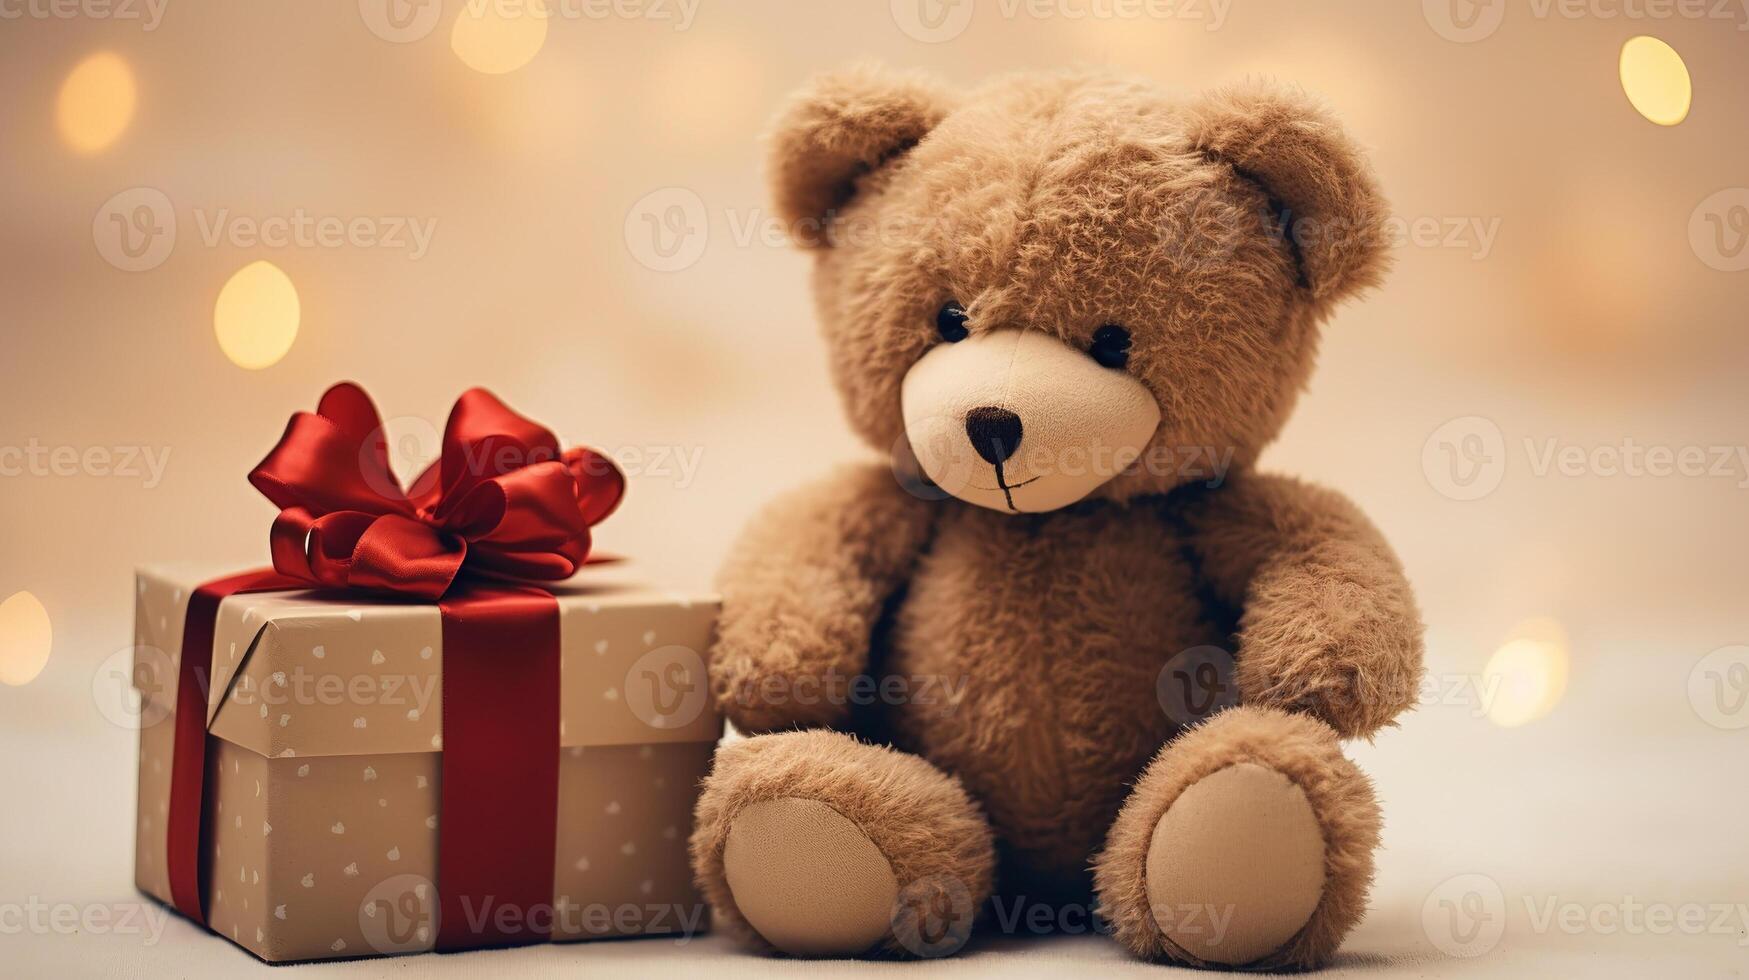 Christmas decor, teddy-bear with a gift close-up on blurred background photo